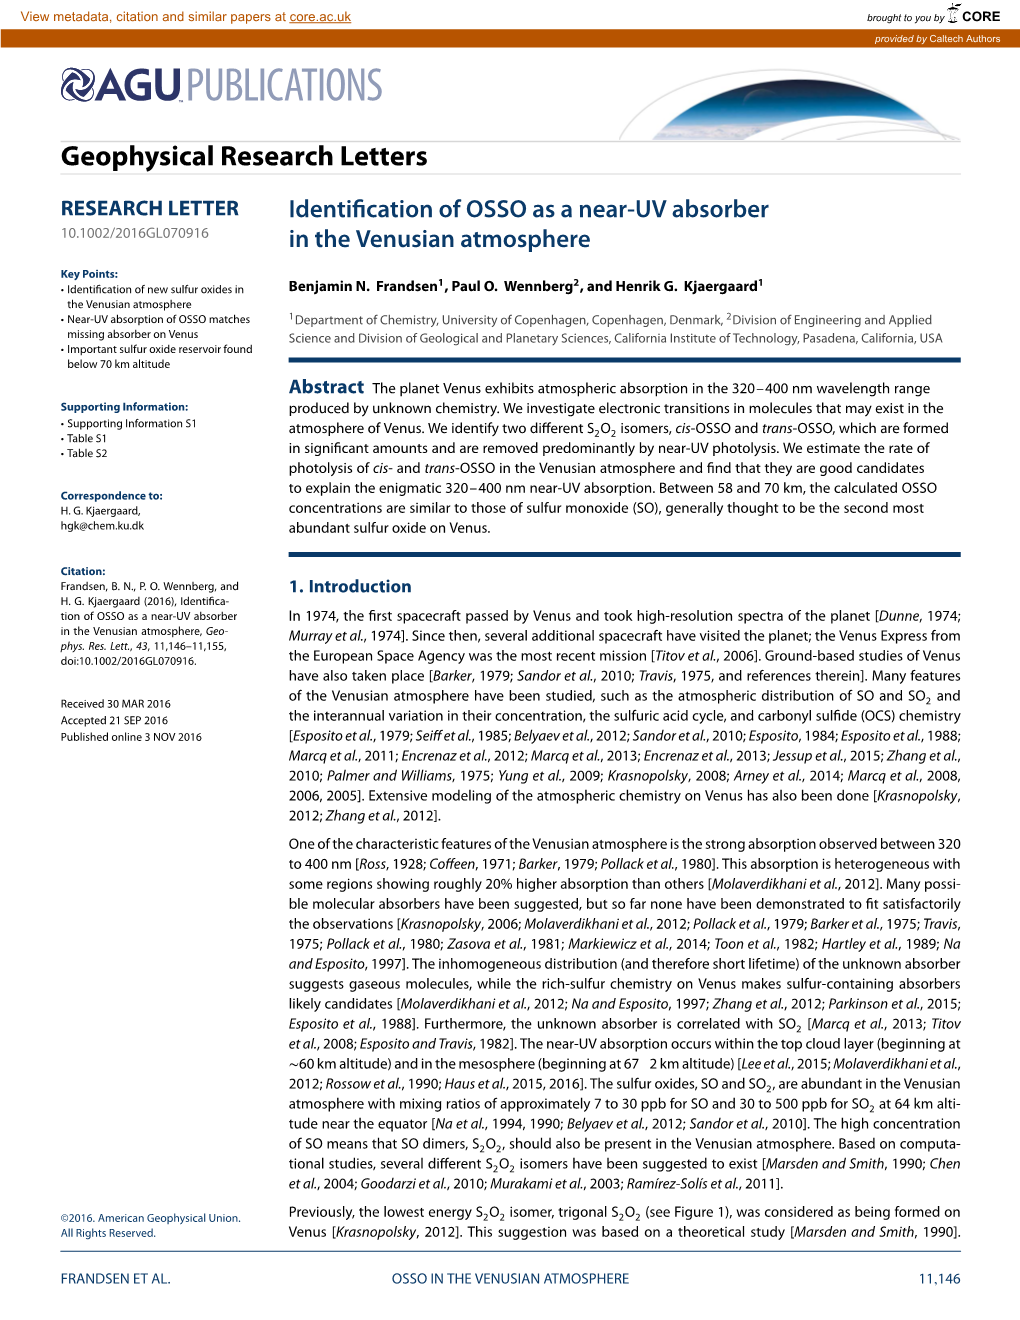 Identification of OSSO As a Near-UV Absorber in the Venusian Atmosphere